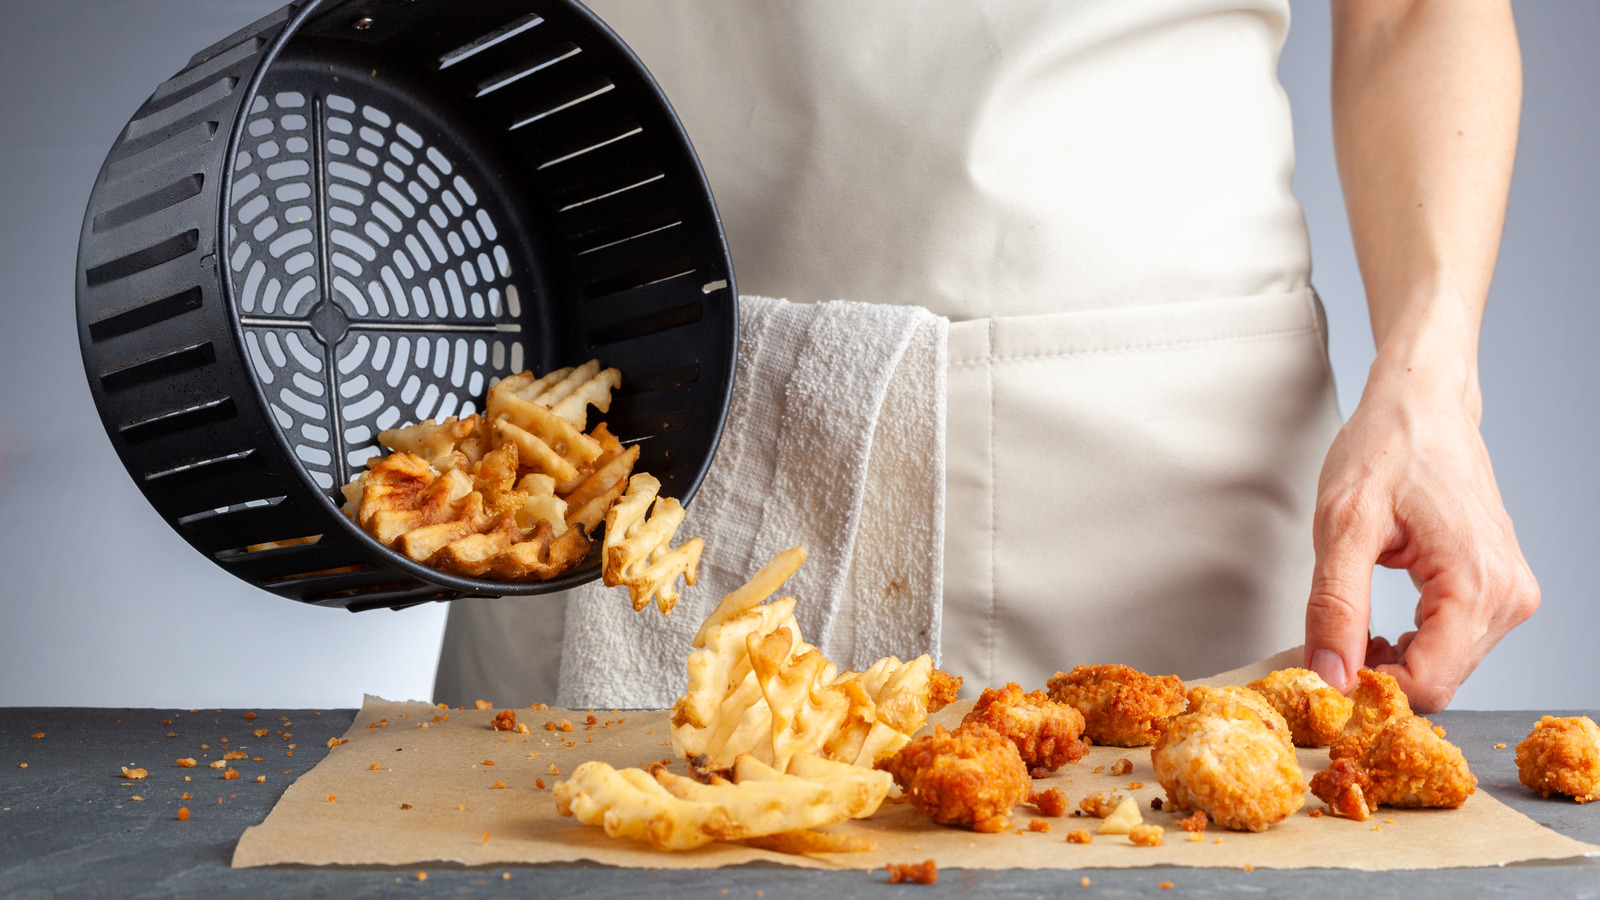 Tips For Getting Perfect Air-Fryer Fries Every Time